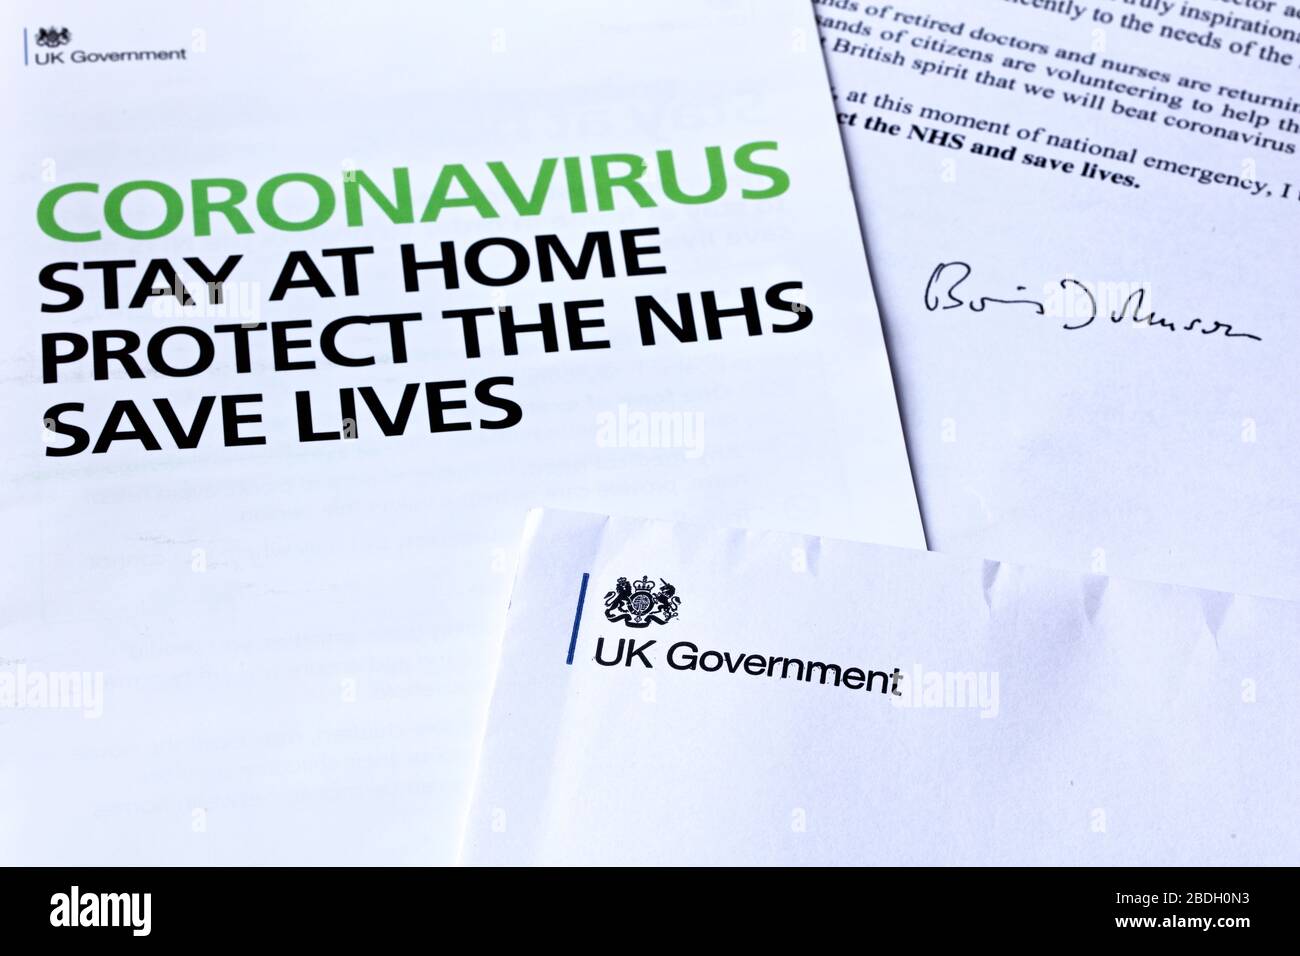 Coronavirus - Boris Johnson letter to the nation giving advice to protect yourself and the NHS Stock Photo